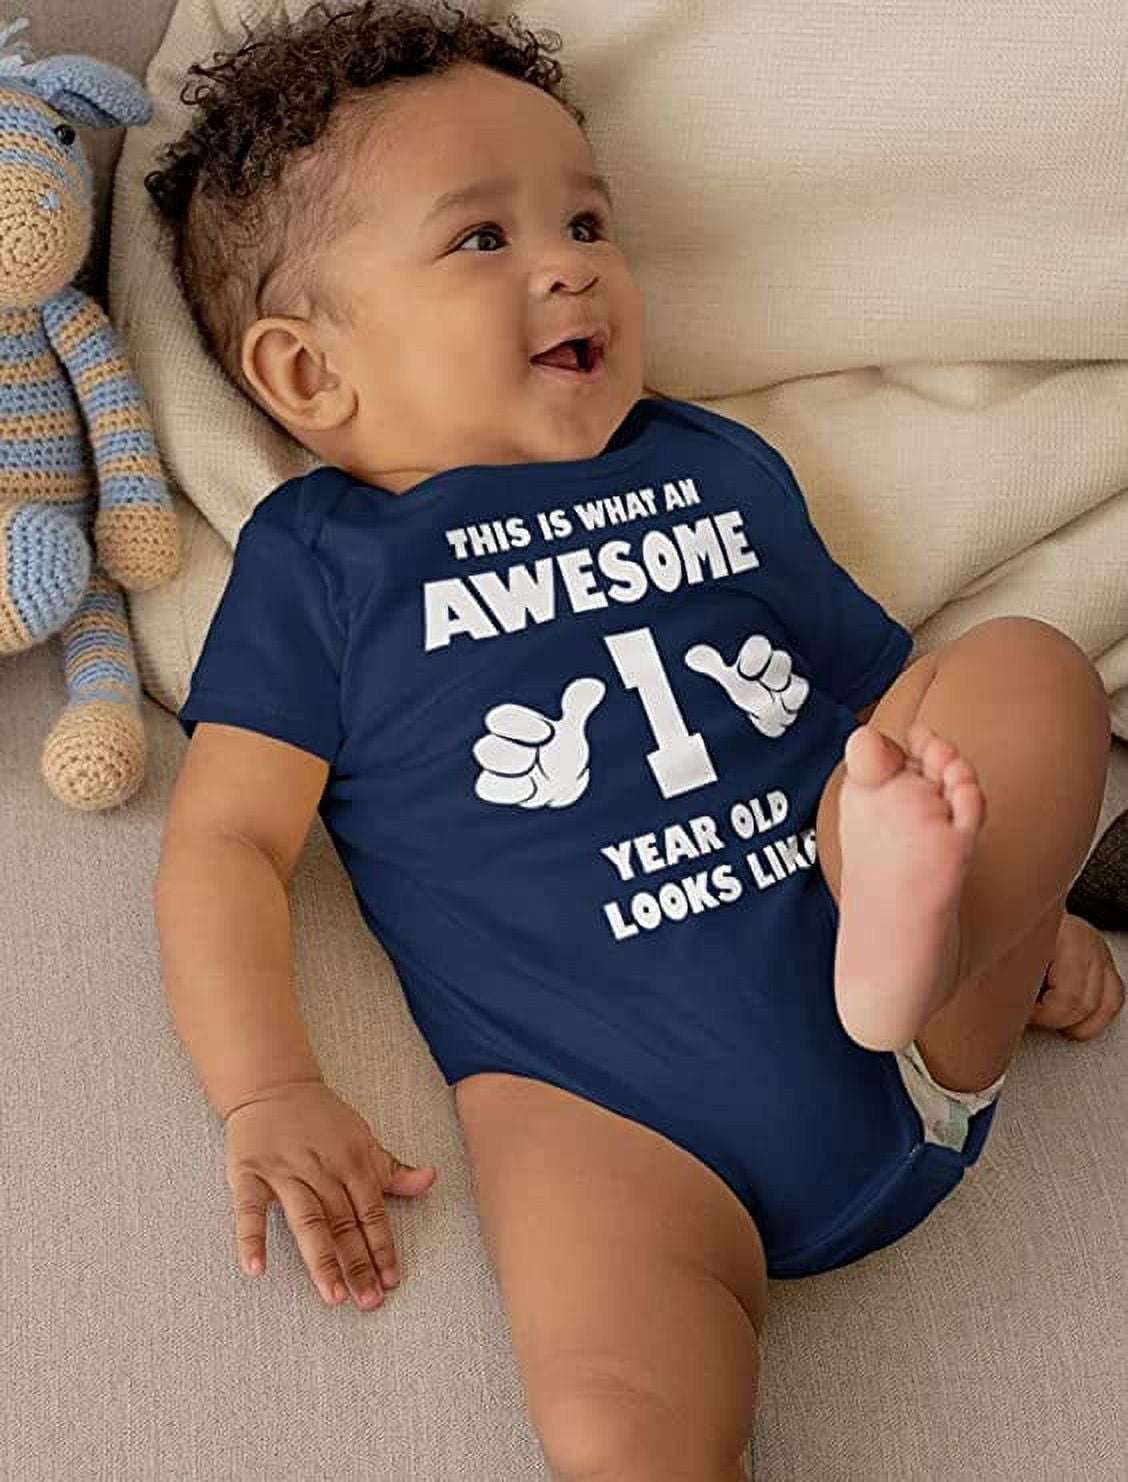 Top 20 Awesome Gifts for First Birthday! |